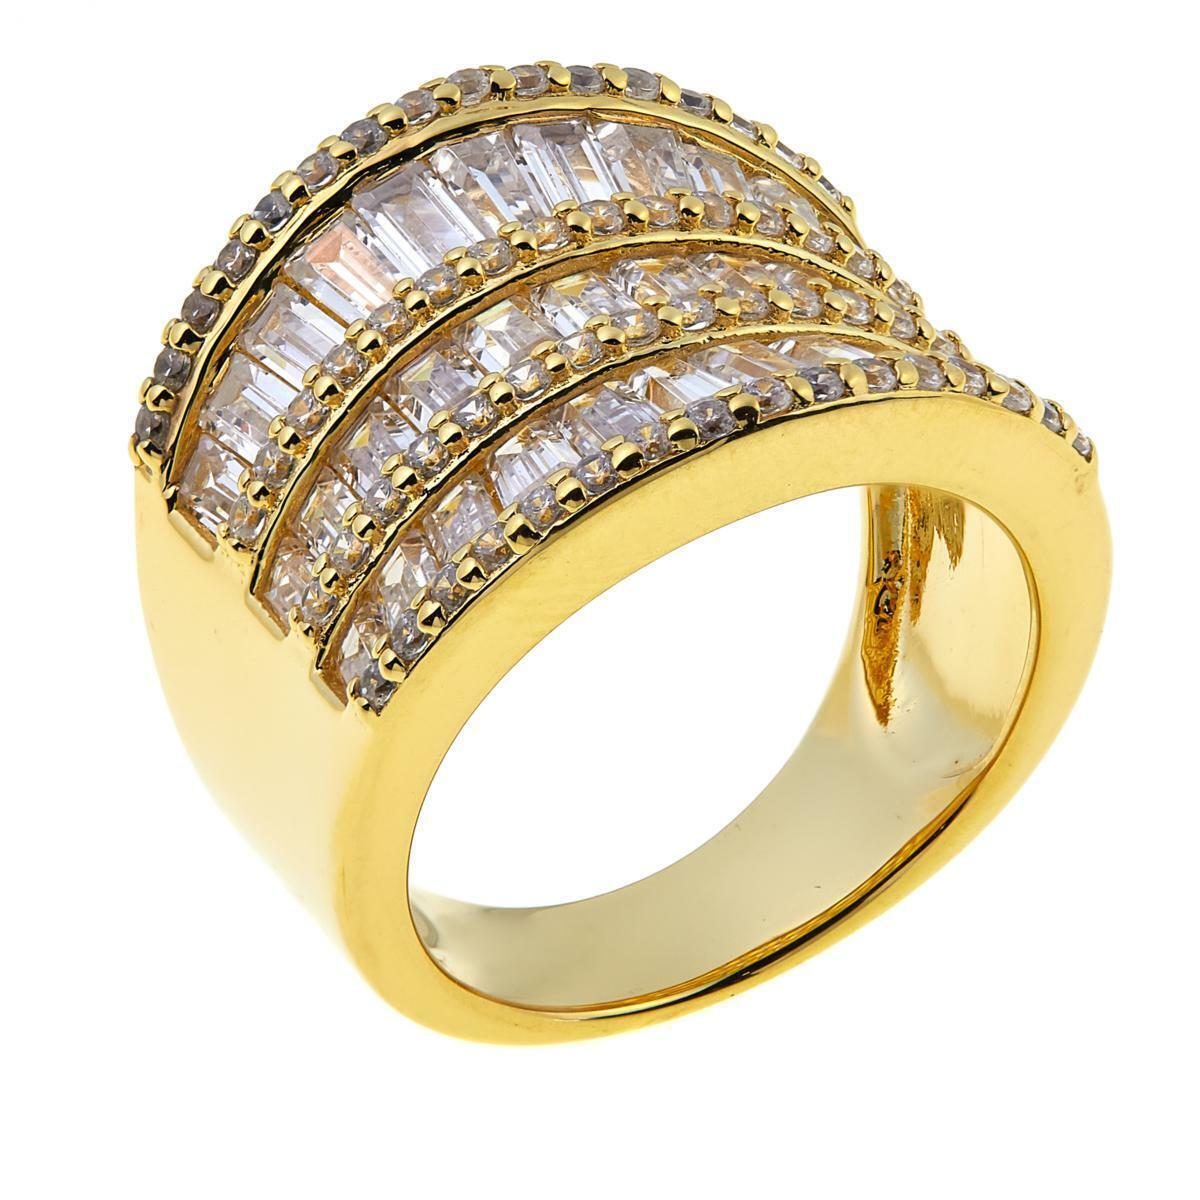 Absolute 3.46Ctw Cz Baguette And Round Multi-Row Saddle Ring Size 7 Goldtone